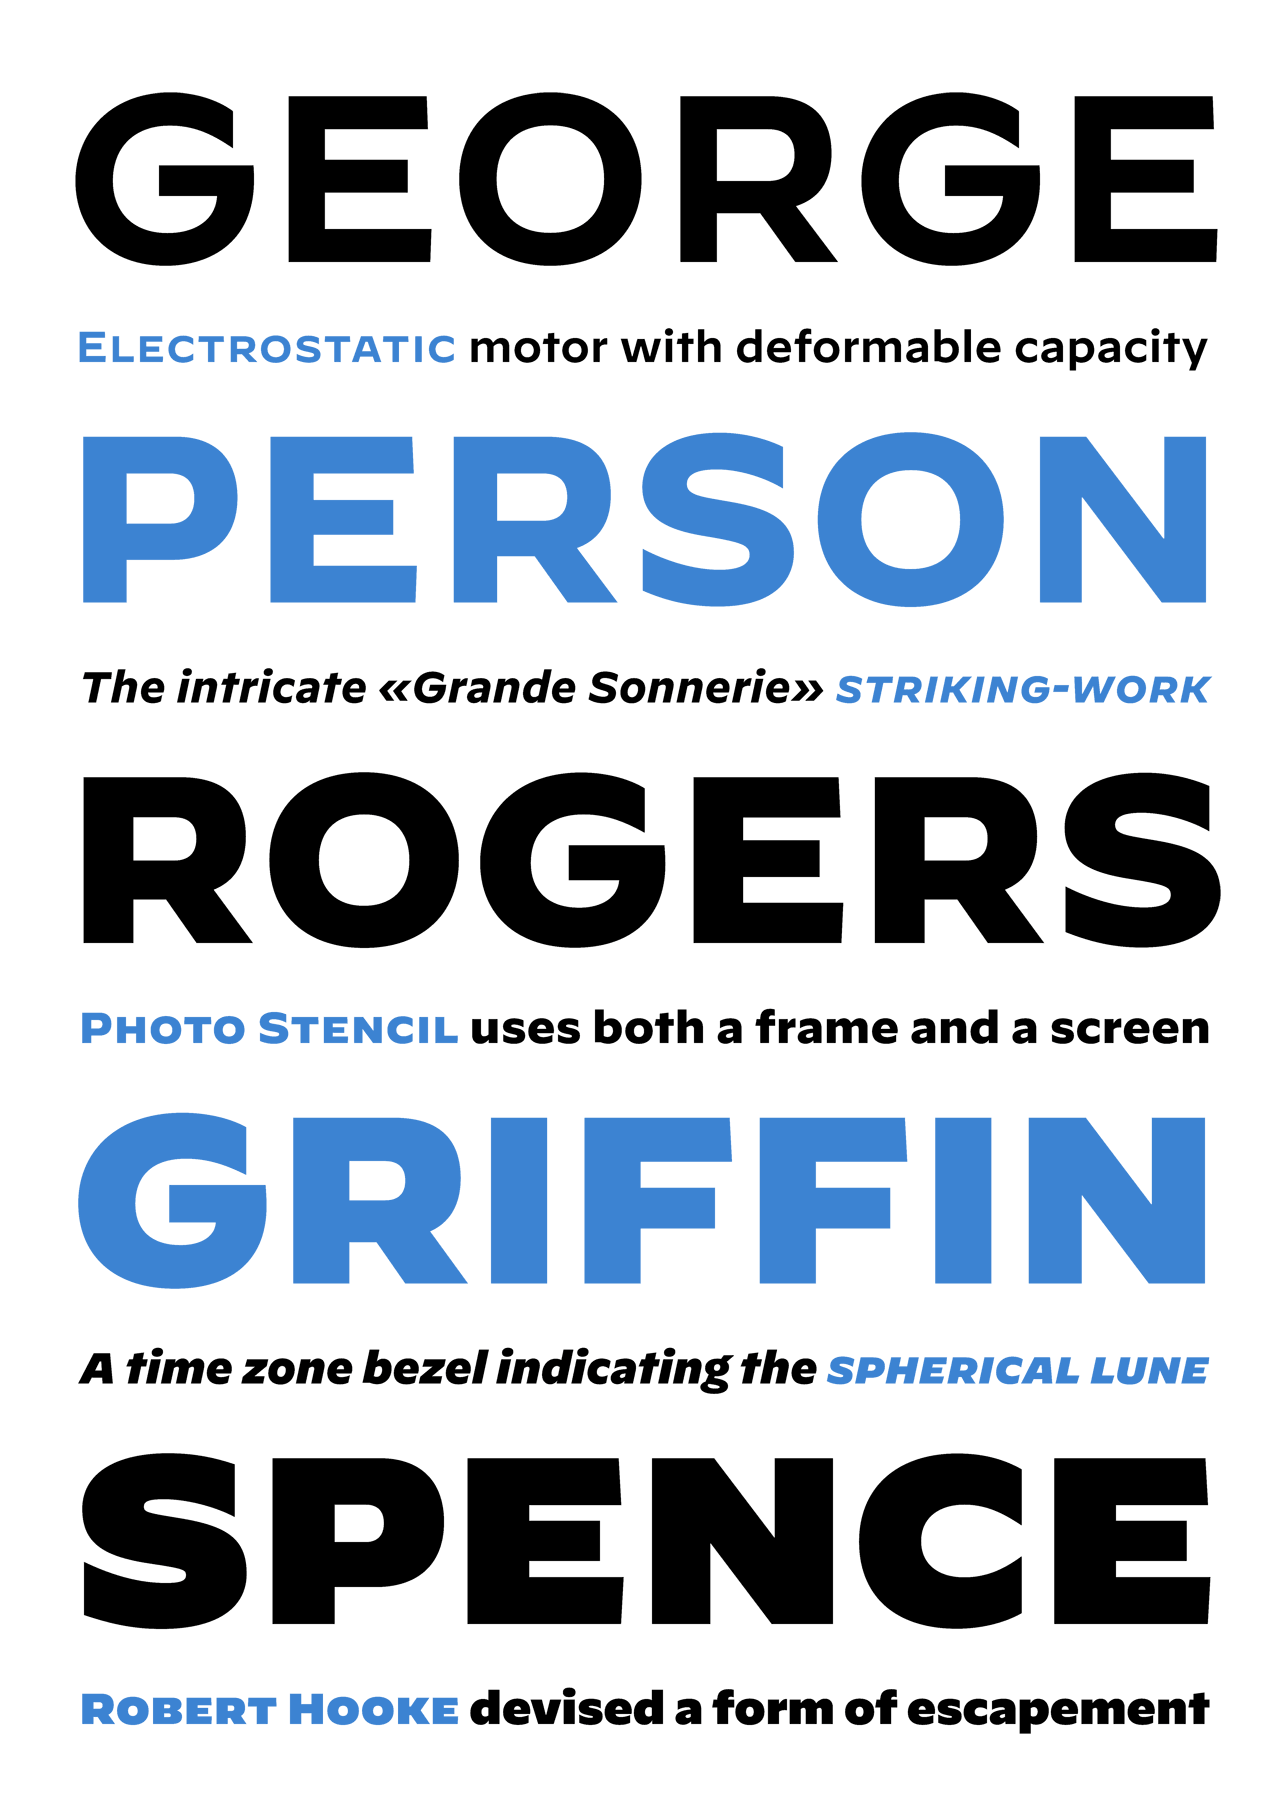 Decimal’s heavy weights in caps, small caps and lowercase